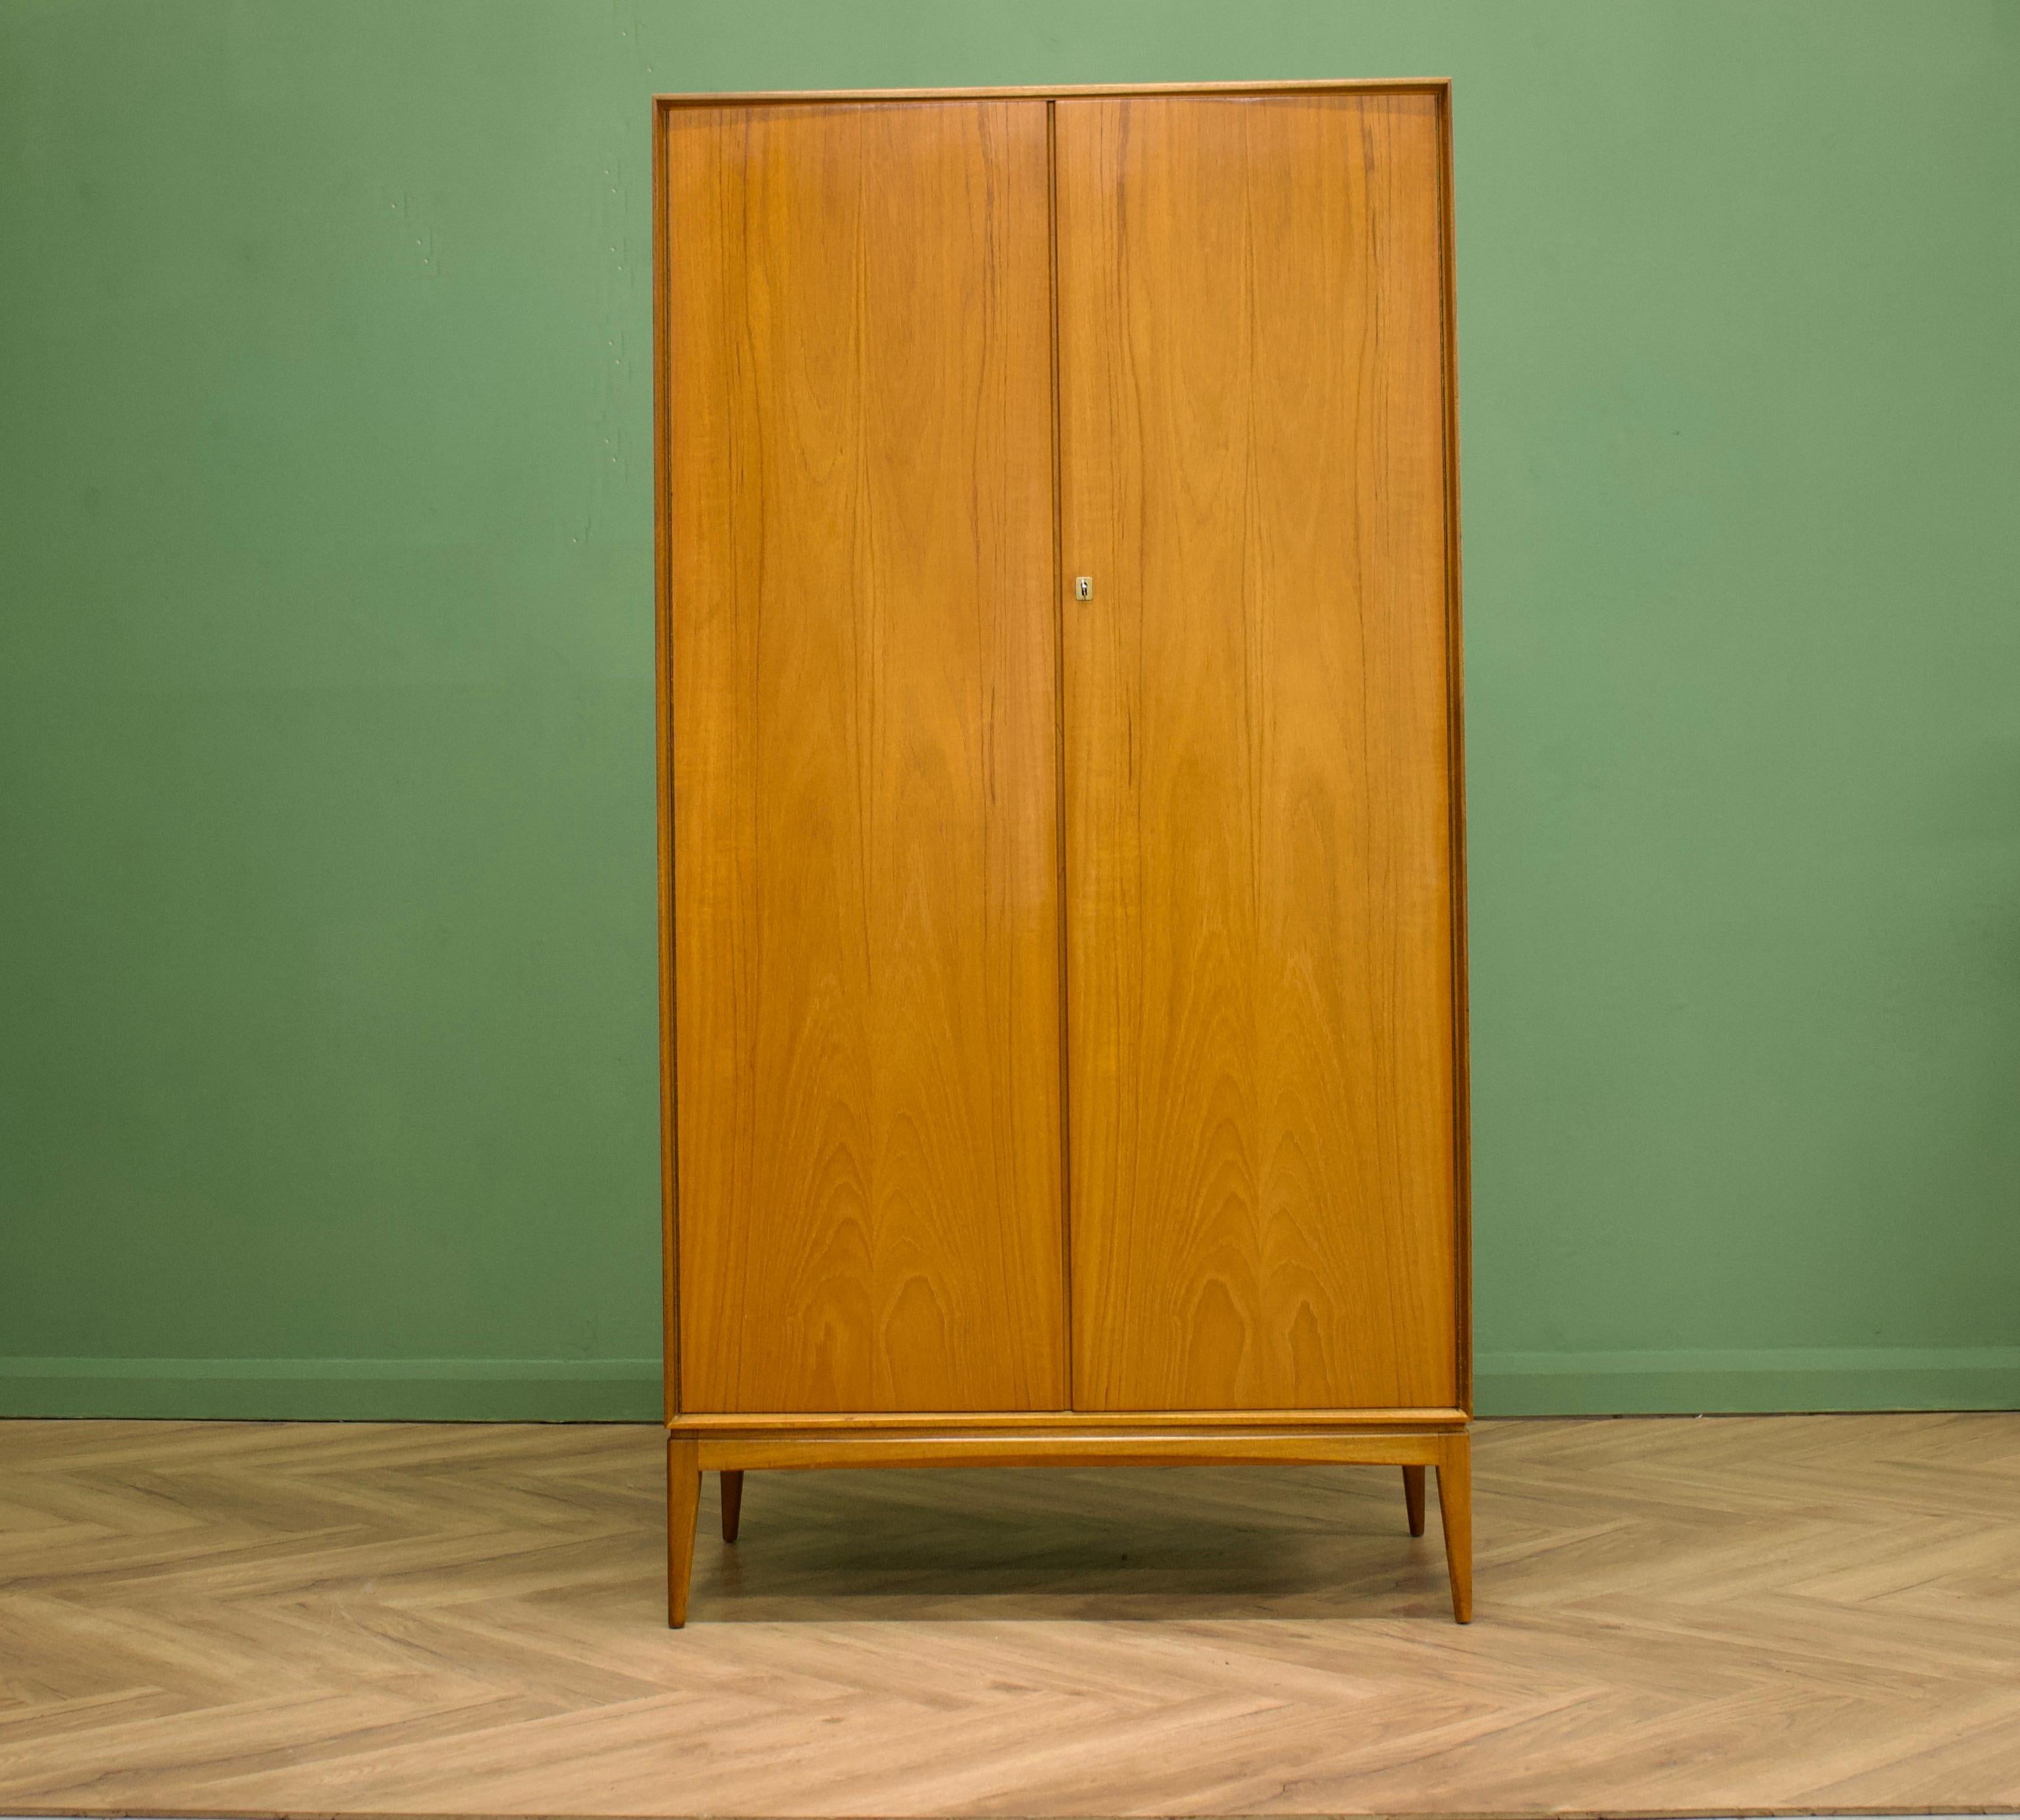 - Mid-Century Modern wardrobe
- Manufactured by McIntosh in the UK
- Made from Teak & Teak Veneer
- Featuring a hanging rail and shelves.